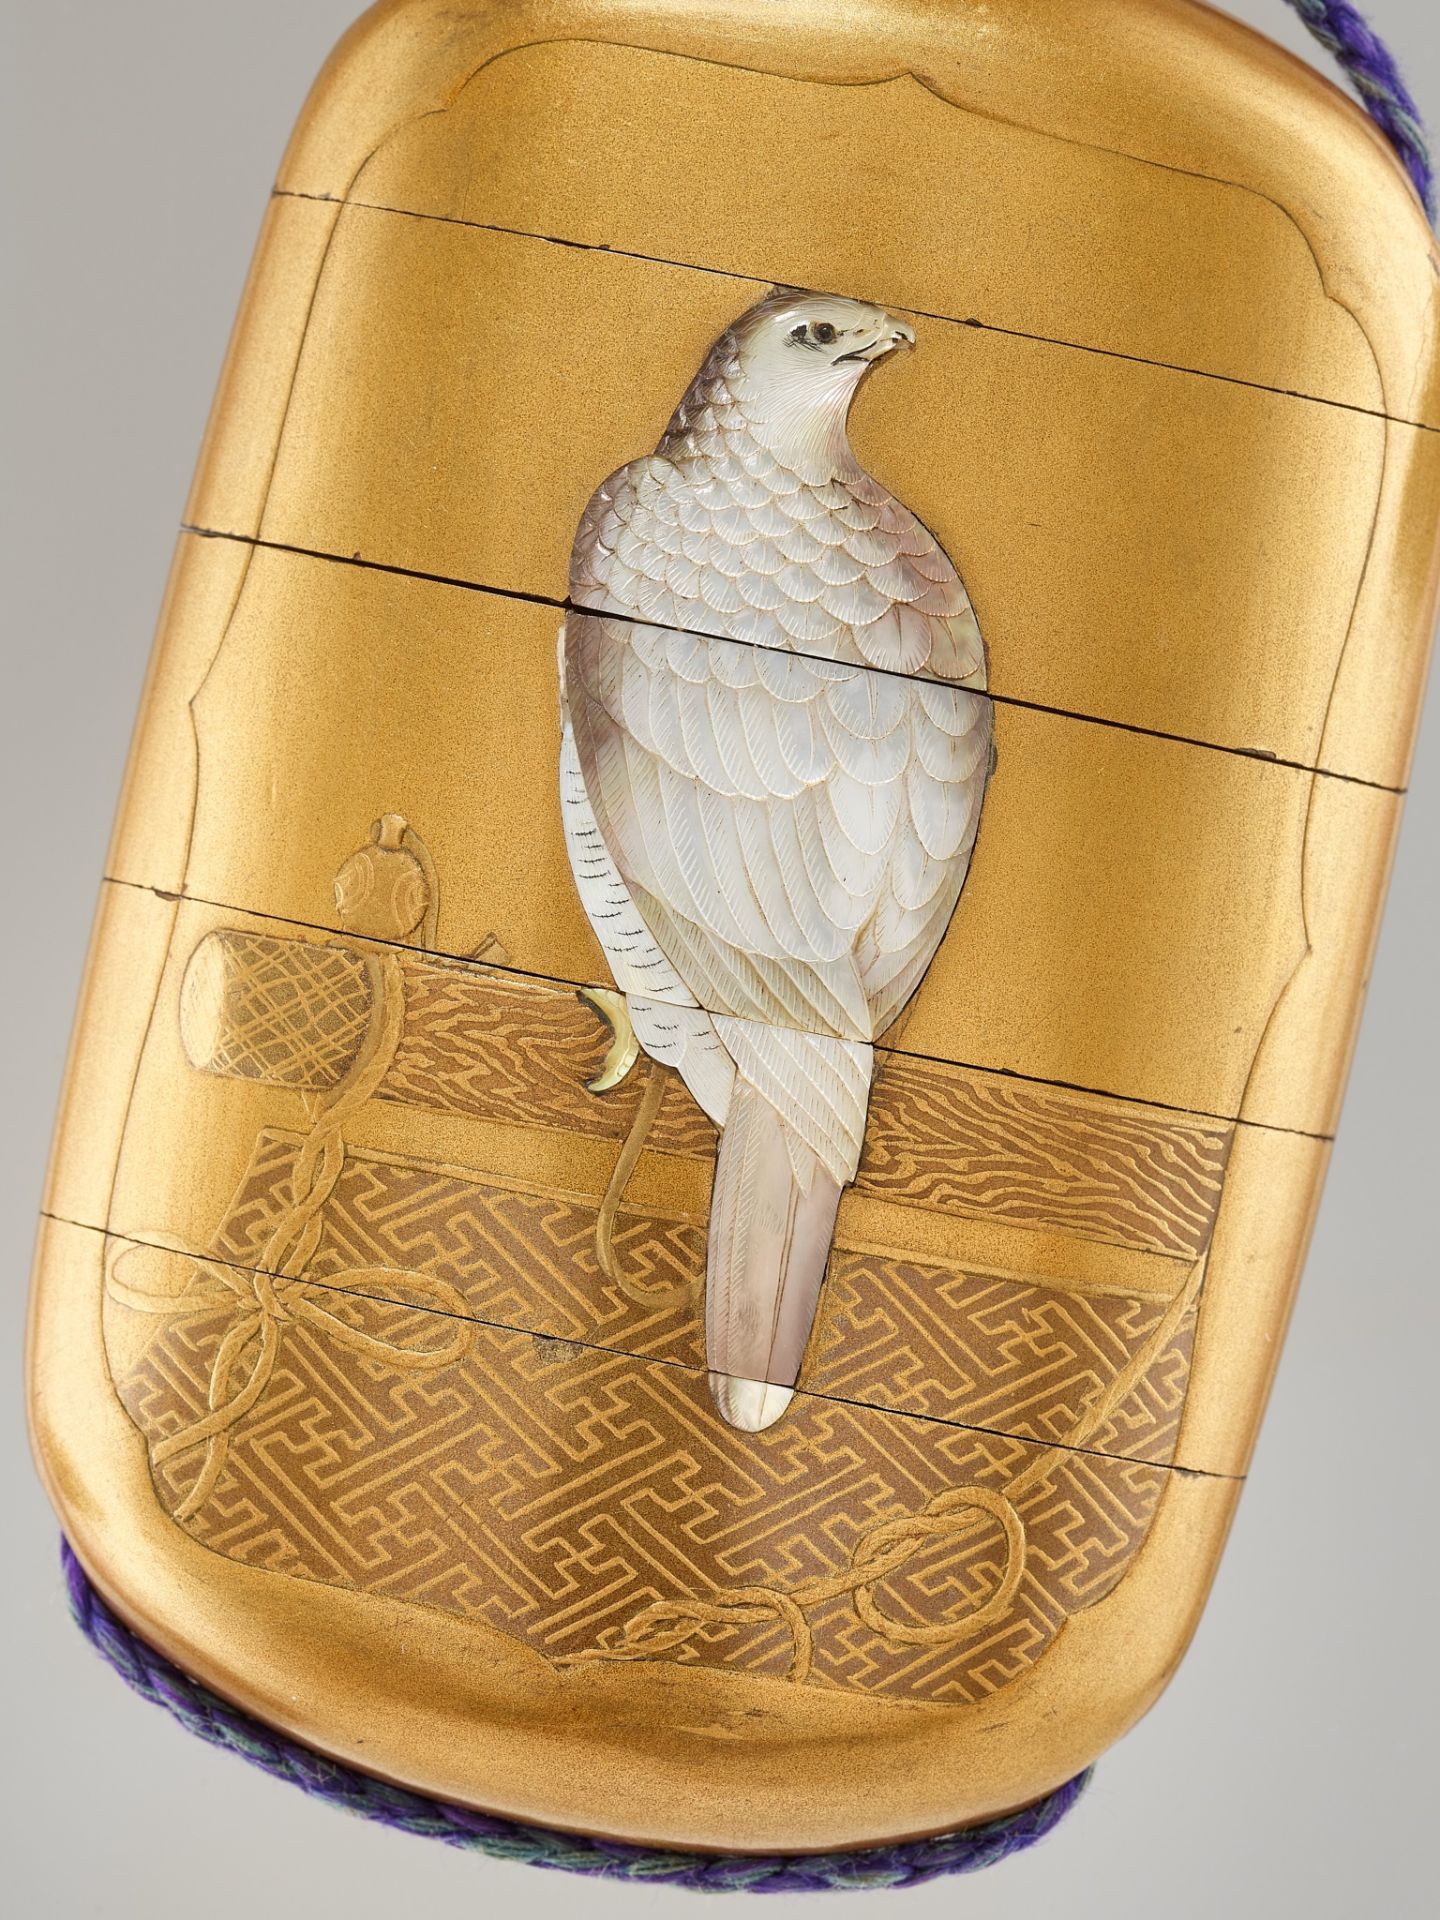 HOYU: A FINE SHIBAYAMA INLAID GOLD LACQUER FOUR-CASE INRO WITH HAWKS - Image 5 of 9